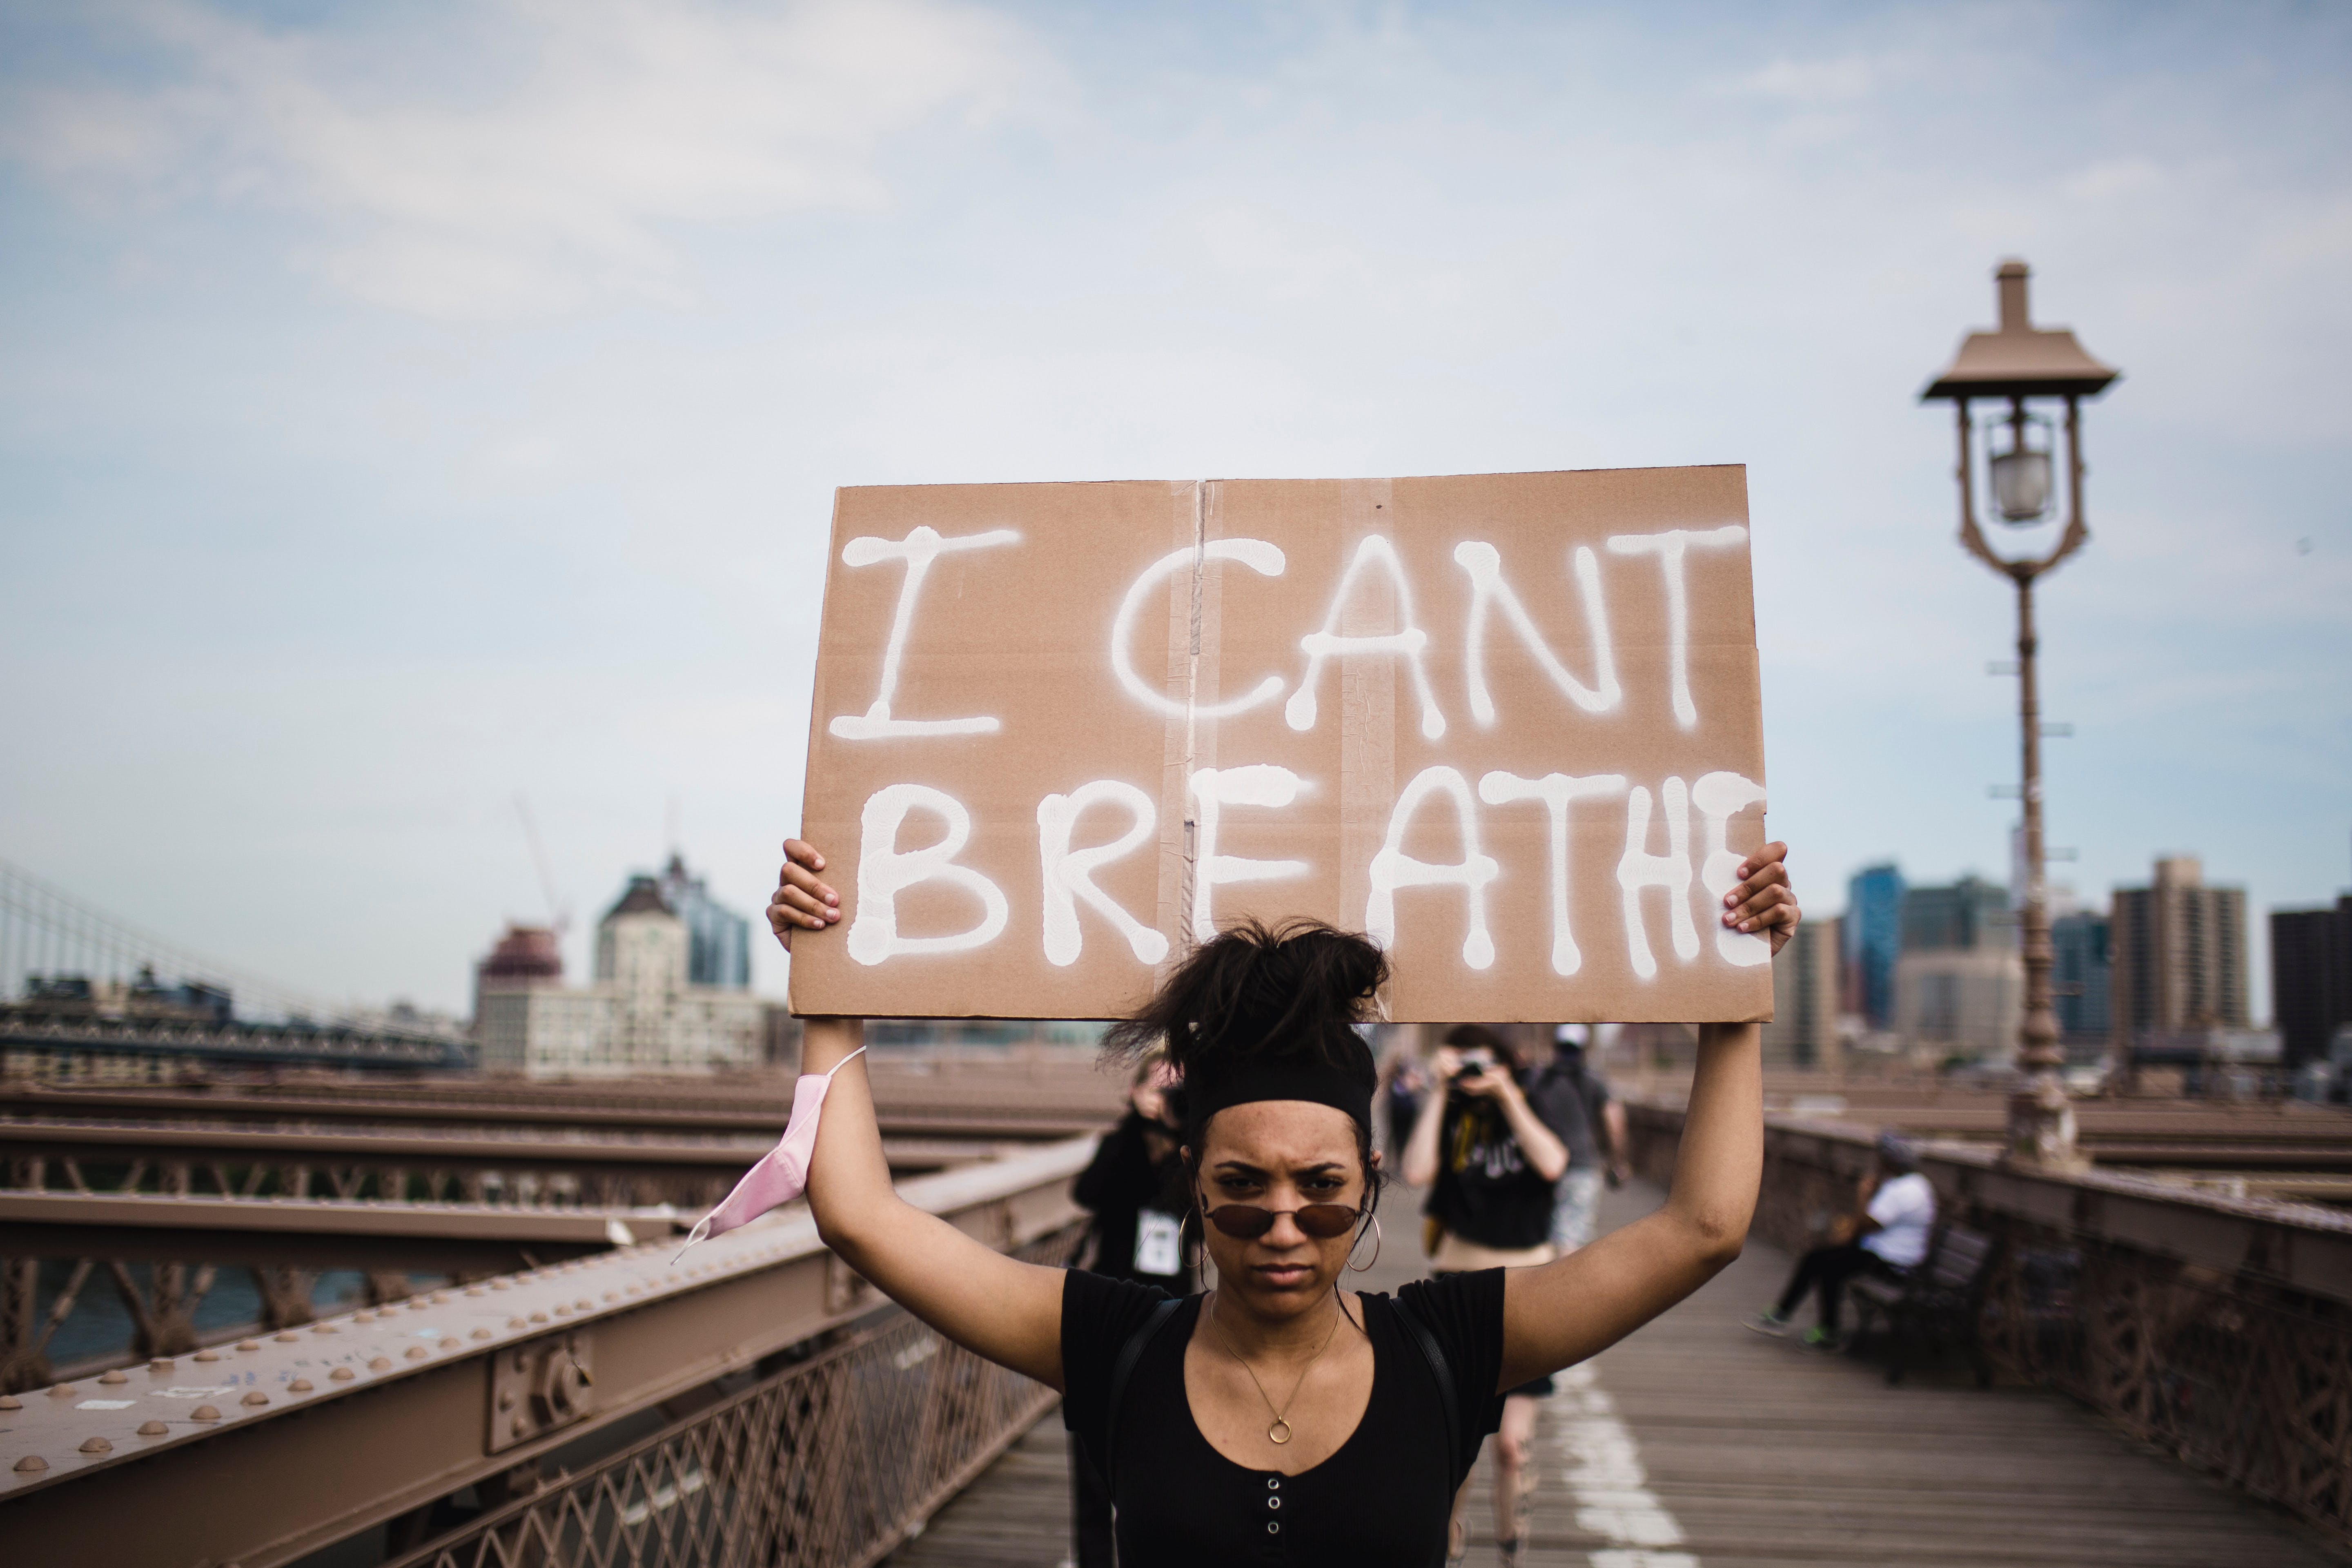 A protestor holding a sign, "I can't breathe"